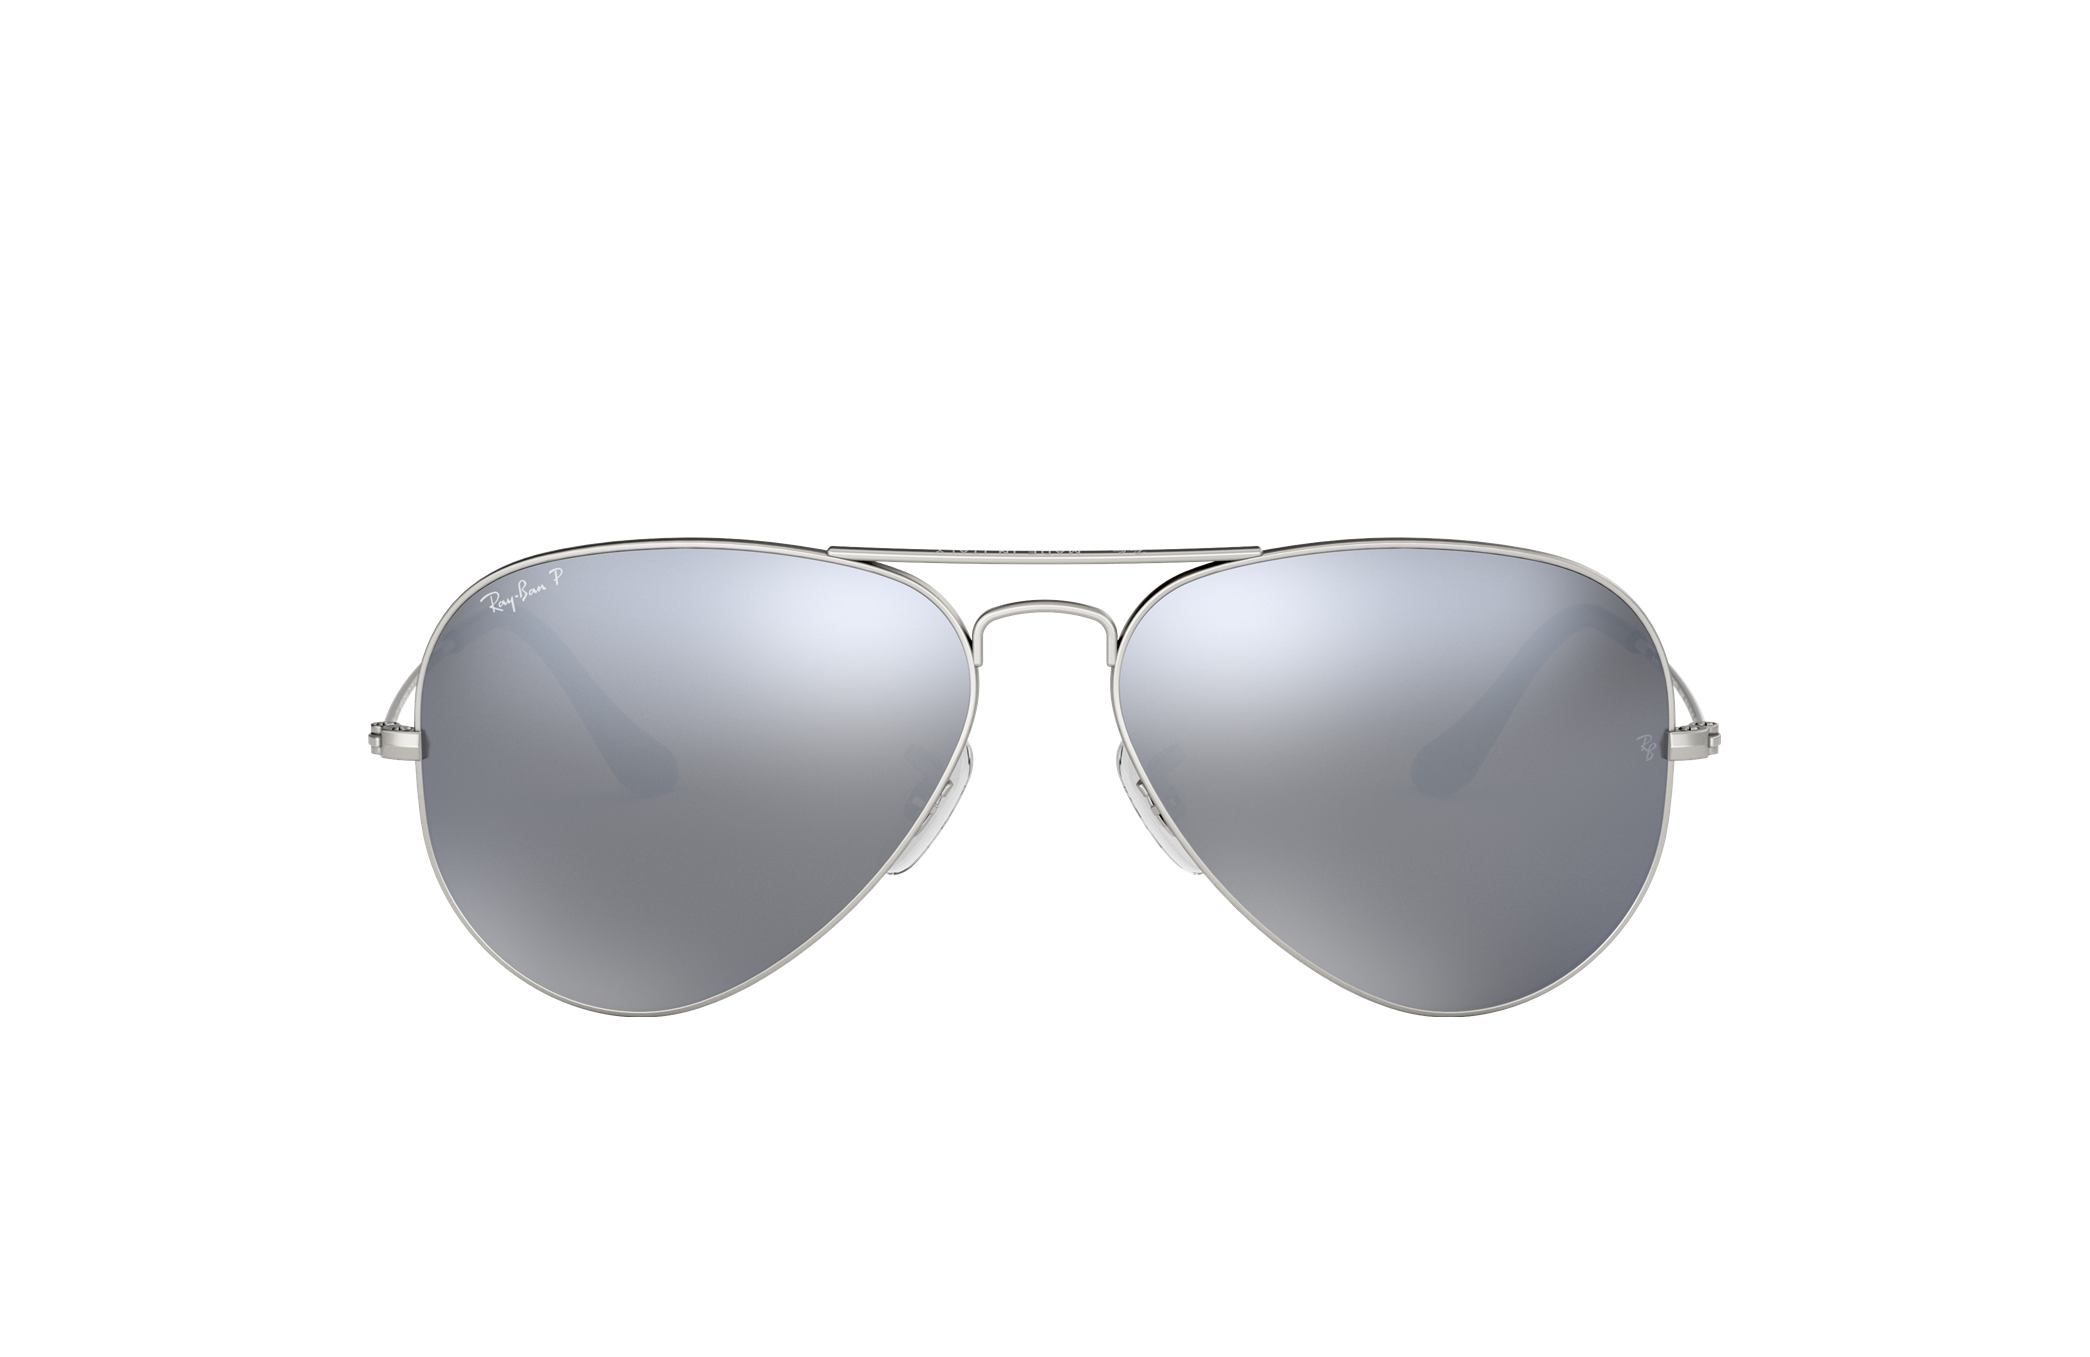 Buy the Ramy Brook Monaco Silver Mirrored Sunglasses | GoodwillFinds